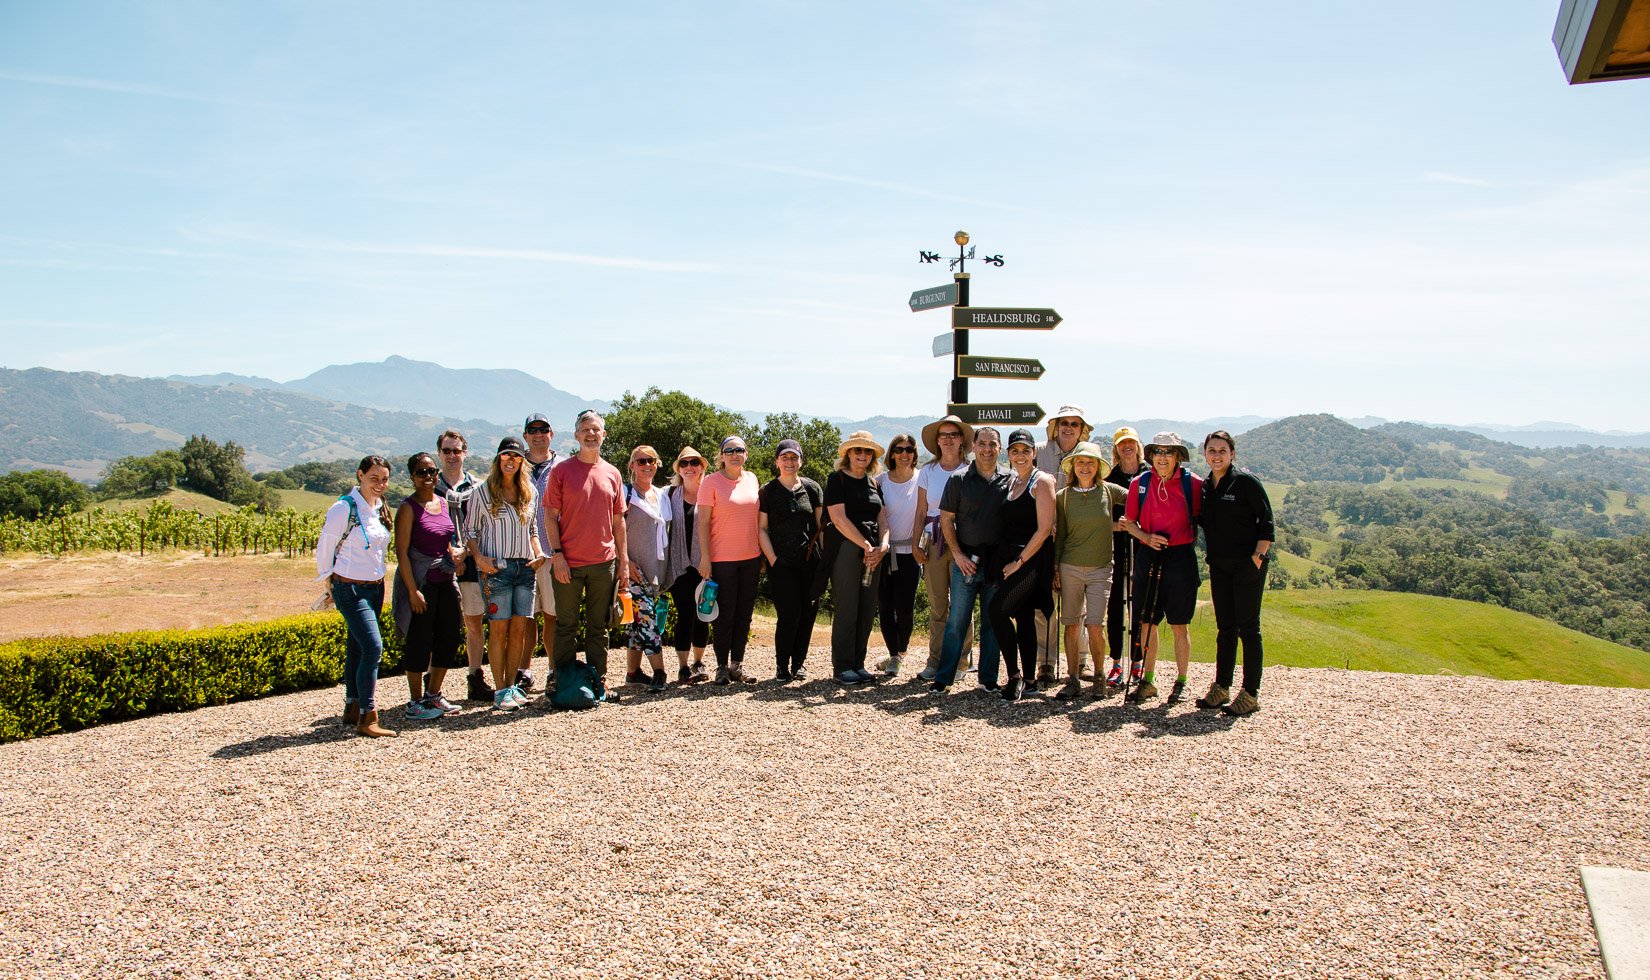 20 guests standing in front of a black and gold direction post. Most are in athletic outdoorsy clothes with sunglasses. Behind them are green vineyards and hills.